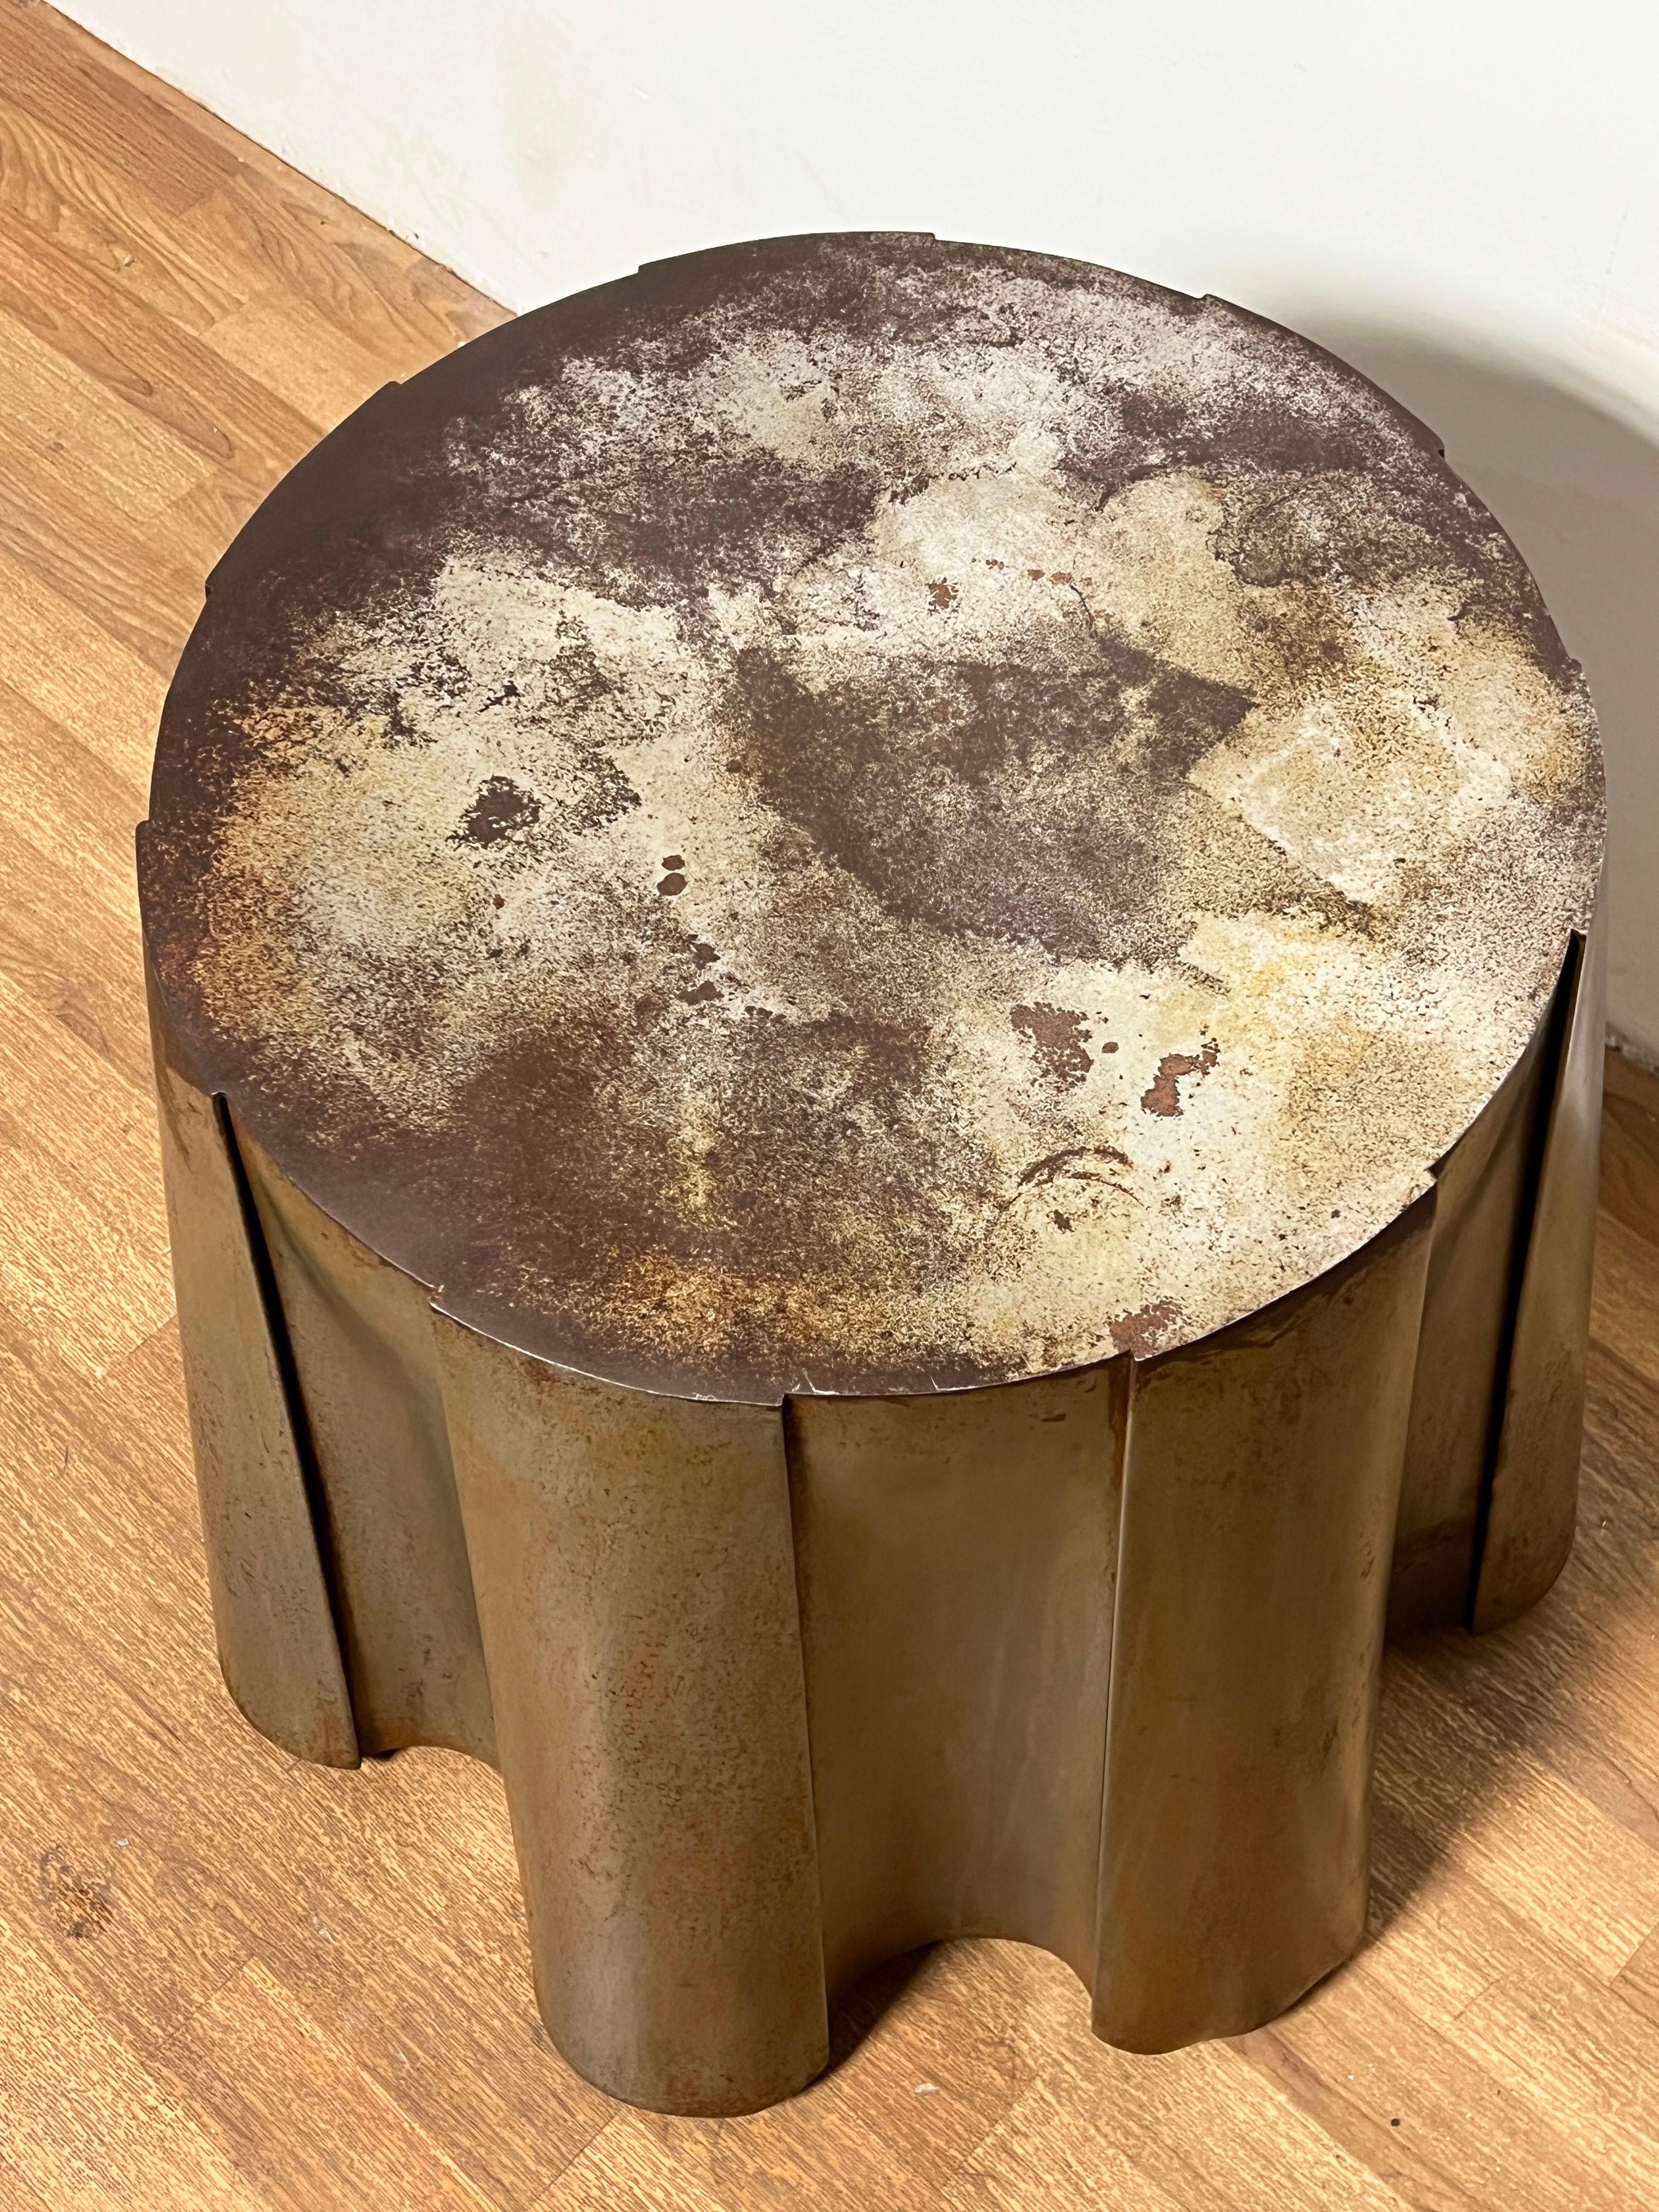 A postmodern side table in galvanized and oxidized steel, fashioned to look as if the table is draped in fabric, in the style of John Dickinson.

